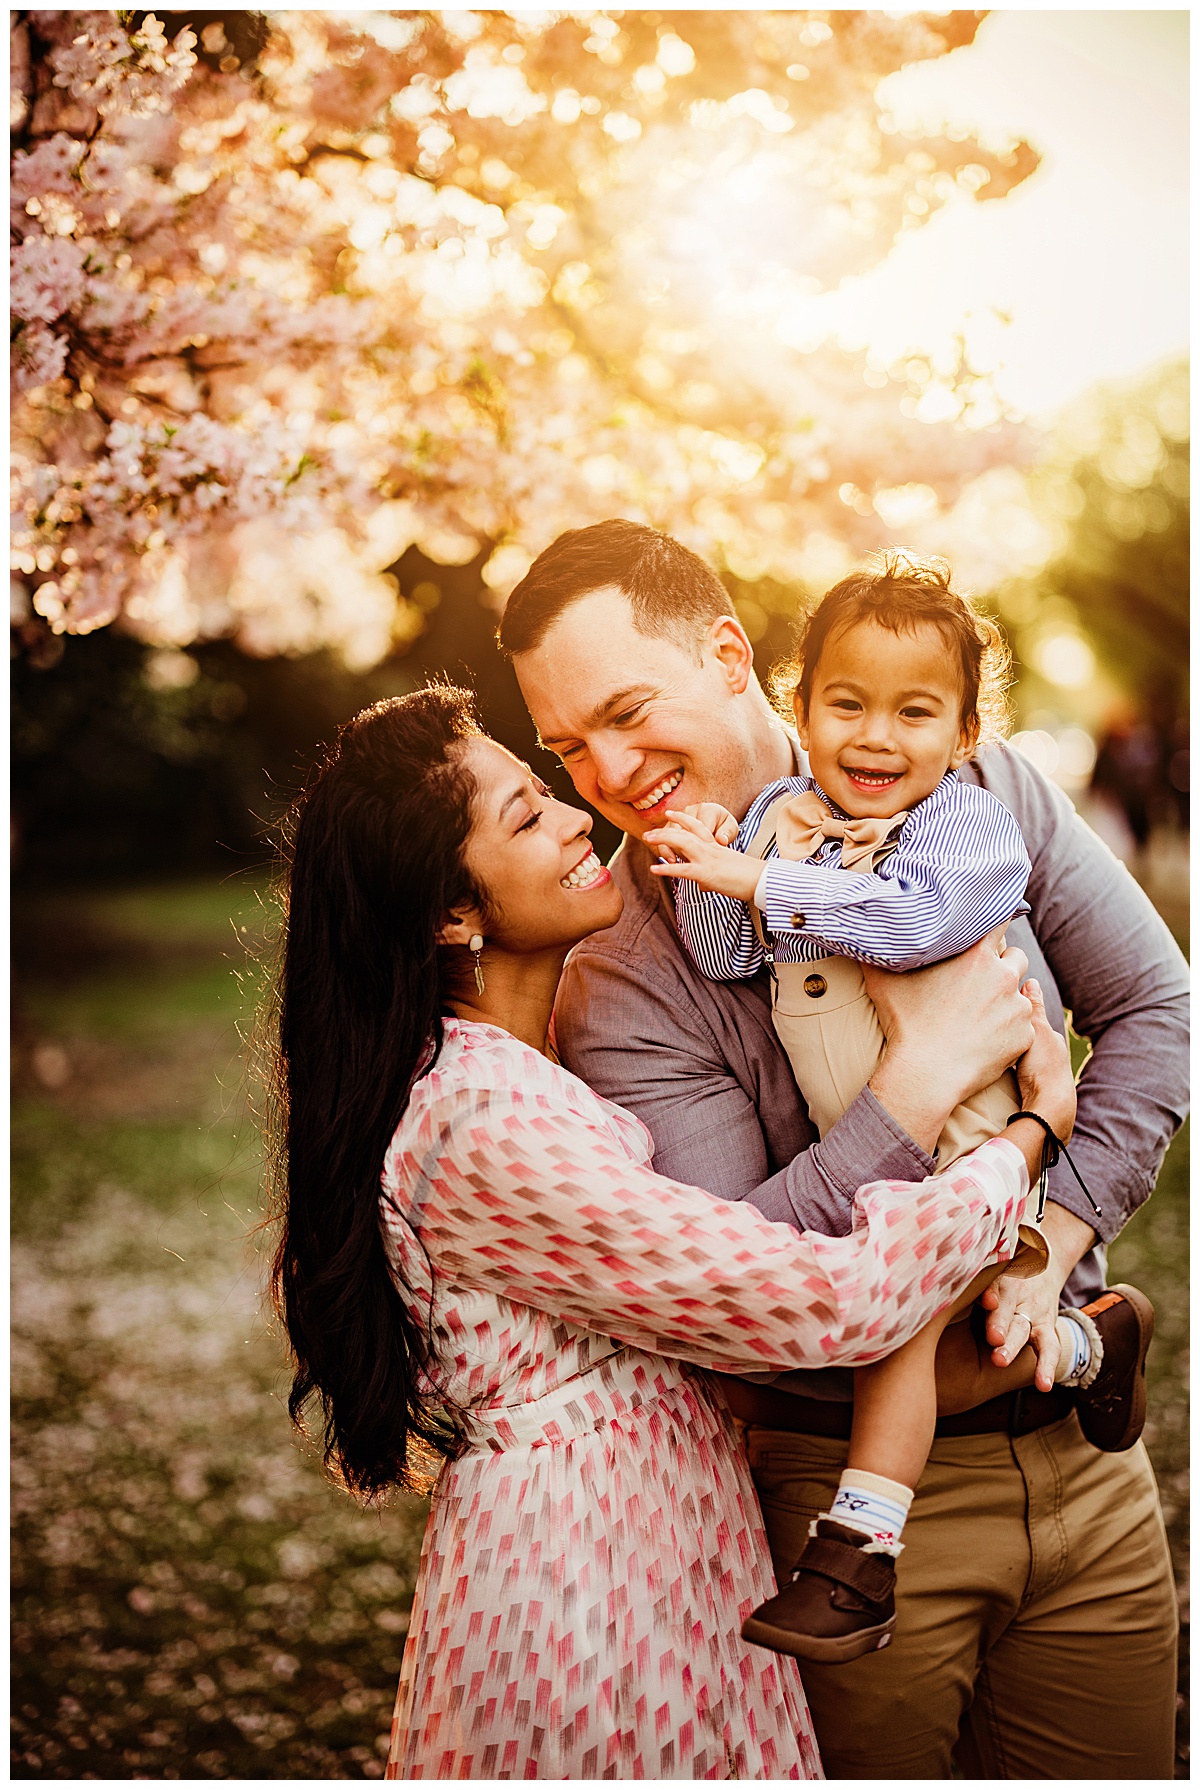 Parents hold their young son during DC Cherry Blossom Photographer